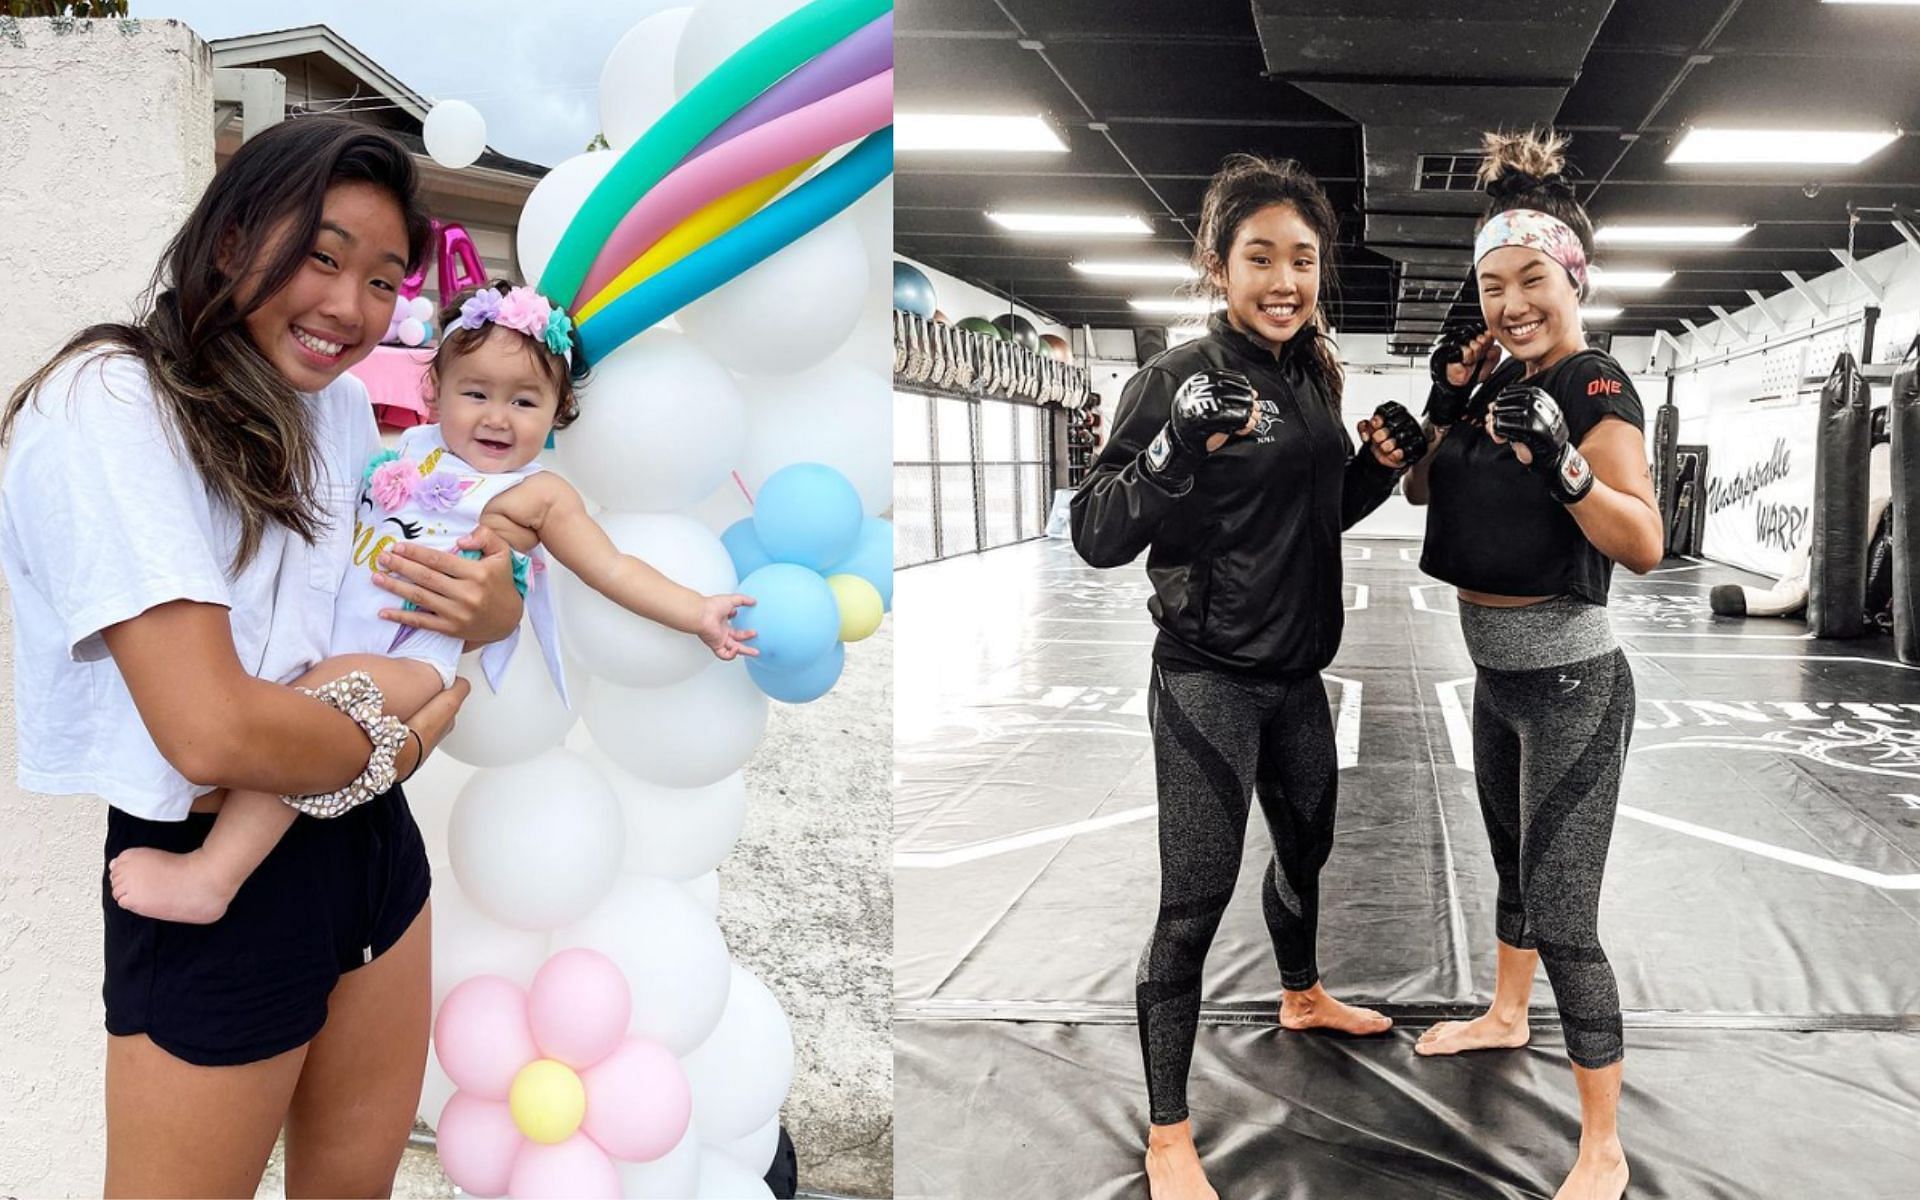 (left) Victoria &quot;The Prodigy&quot; Lee and (right) Angela &quot;Unstoppable&quot; Lee [Credit: Instagram @victorialee.mma @angelaleemma]